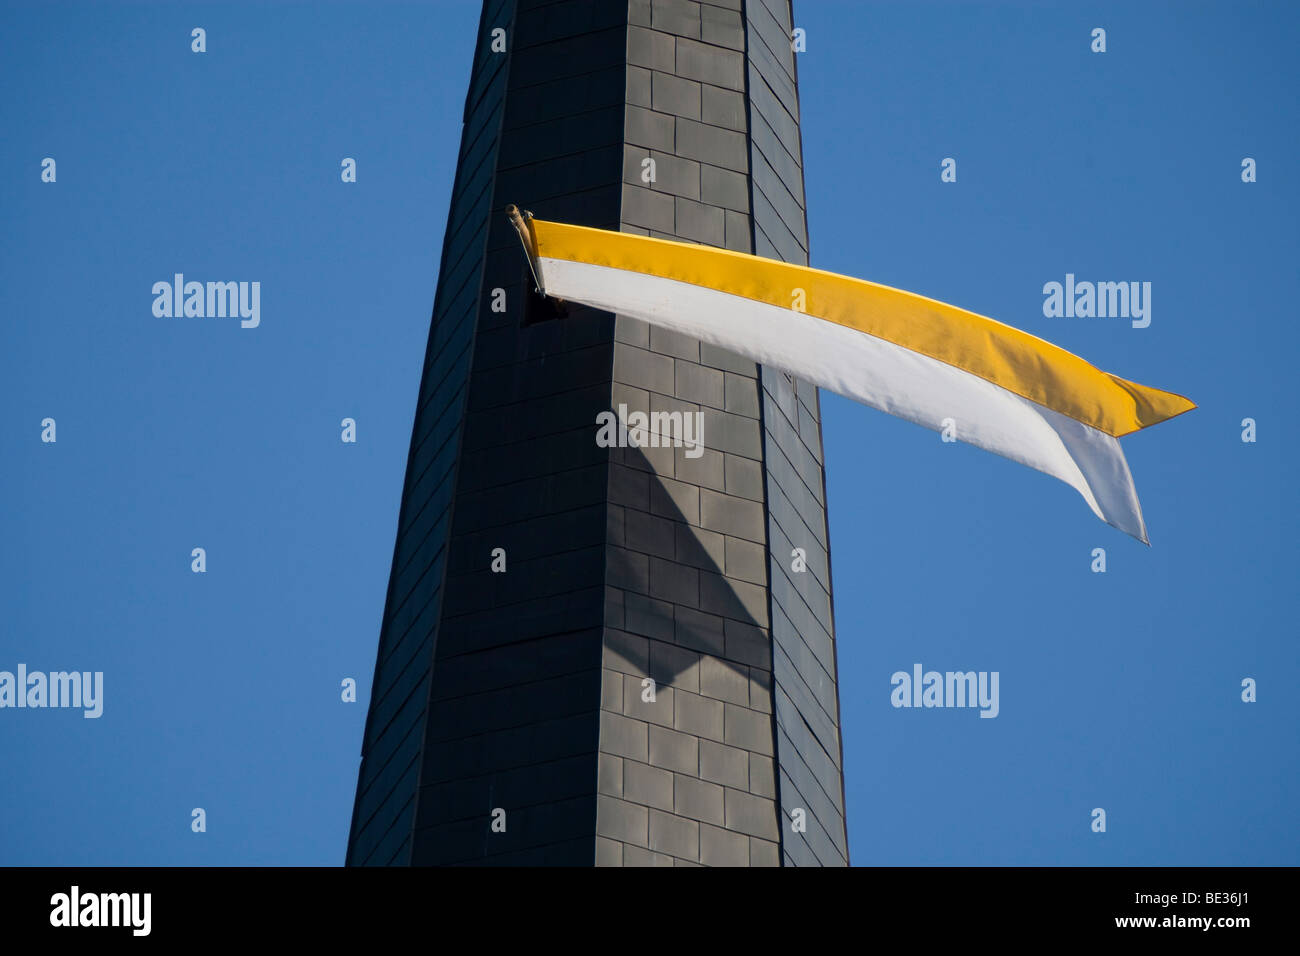 White and yellow flag fluttering from a church tower window against a steel blue sky Stock Photo